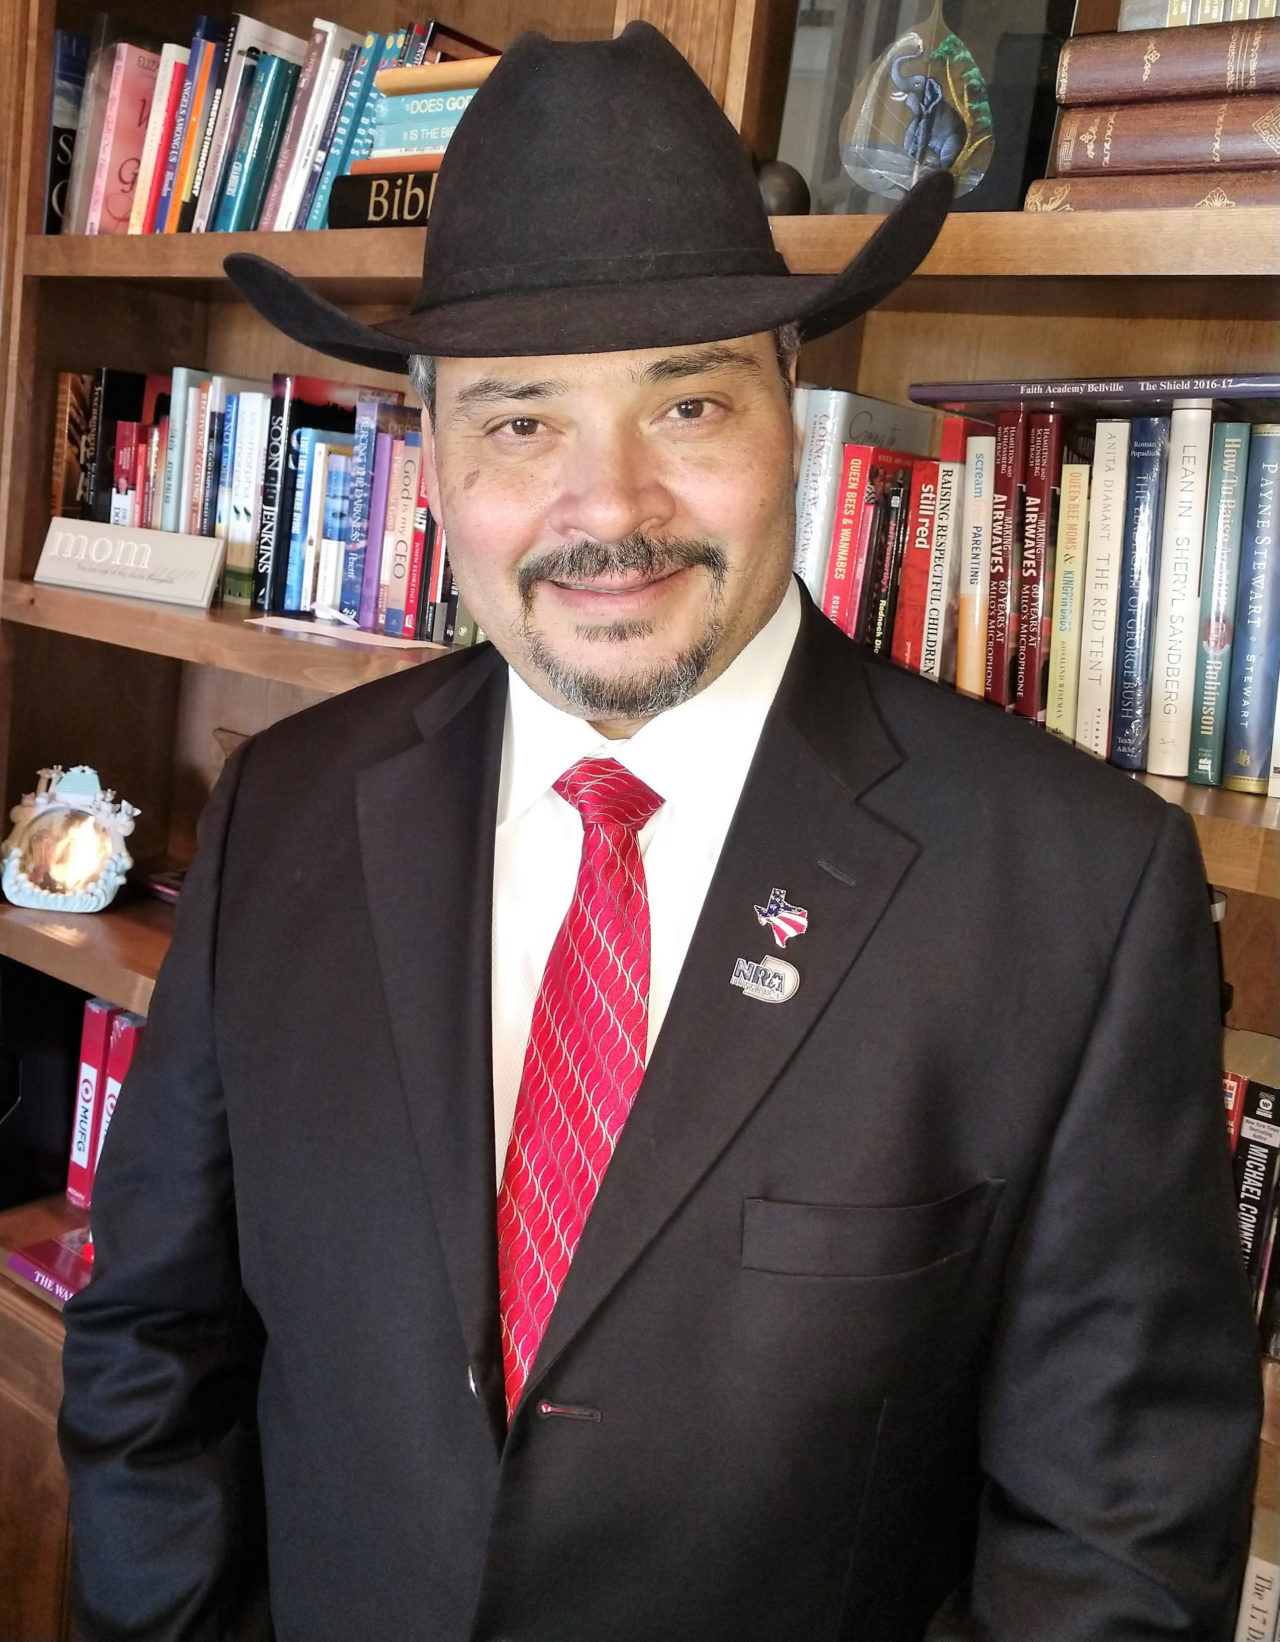 Texas Businessman Rick Figueroa Announces Candidacy for NRA Board of Directors